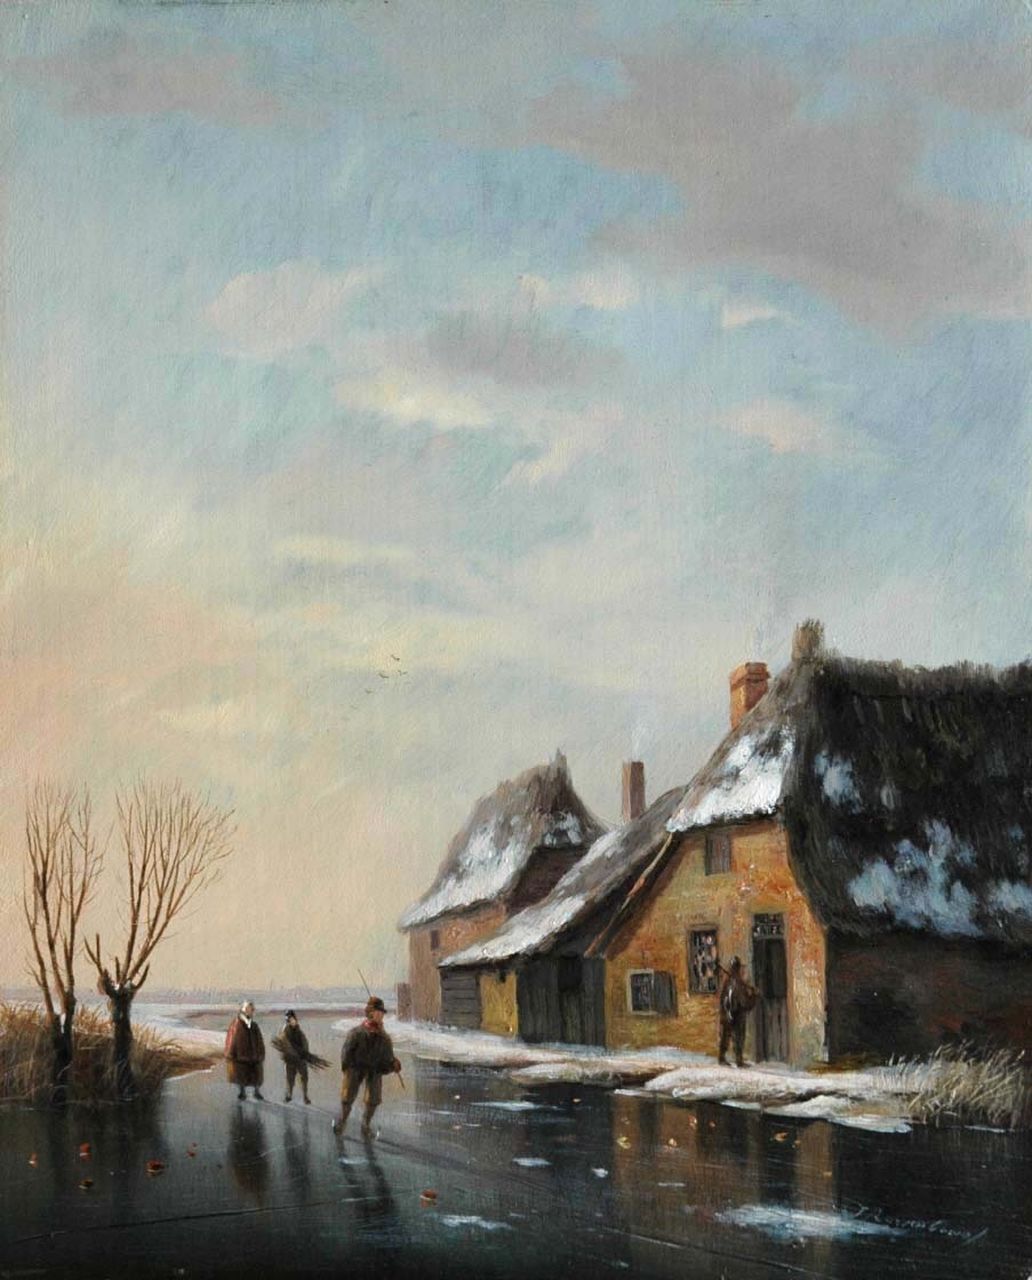 Roosenboom N.J.  | Nicolaas Johannes Roosenboom, Skaters on a frozen waterway, oil on panel 23.6 x 19.2 cm, signed l.r. and painted circa 1830